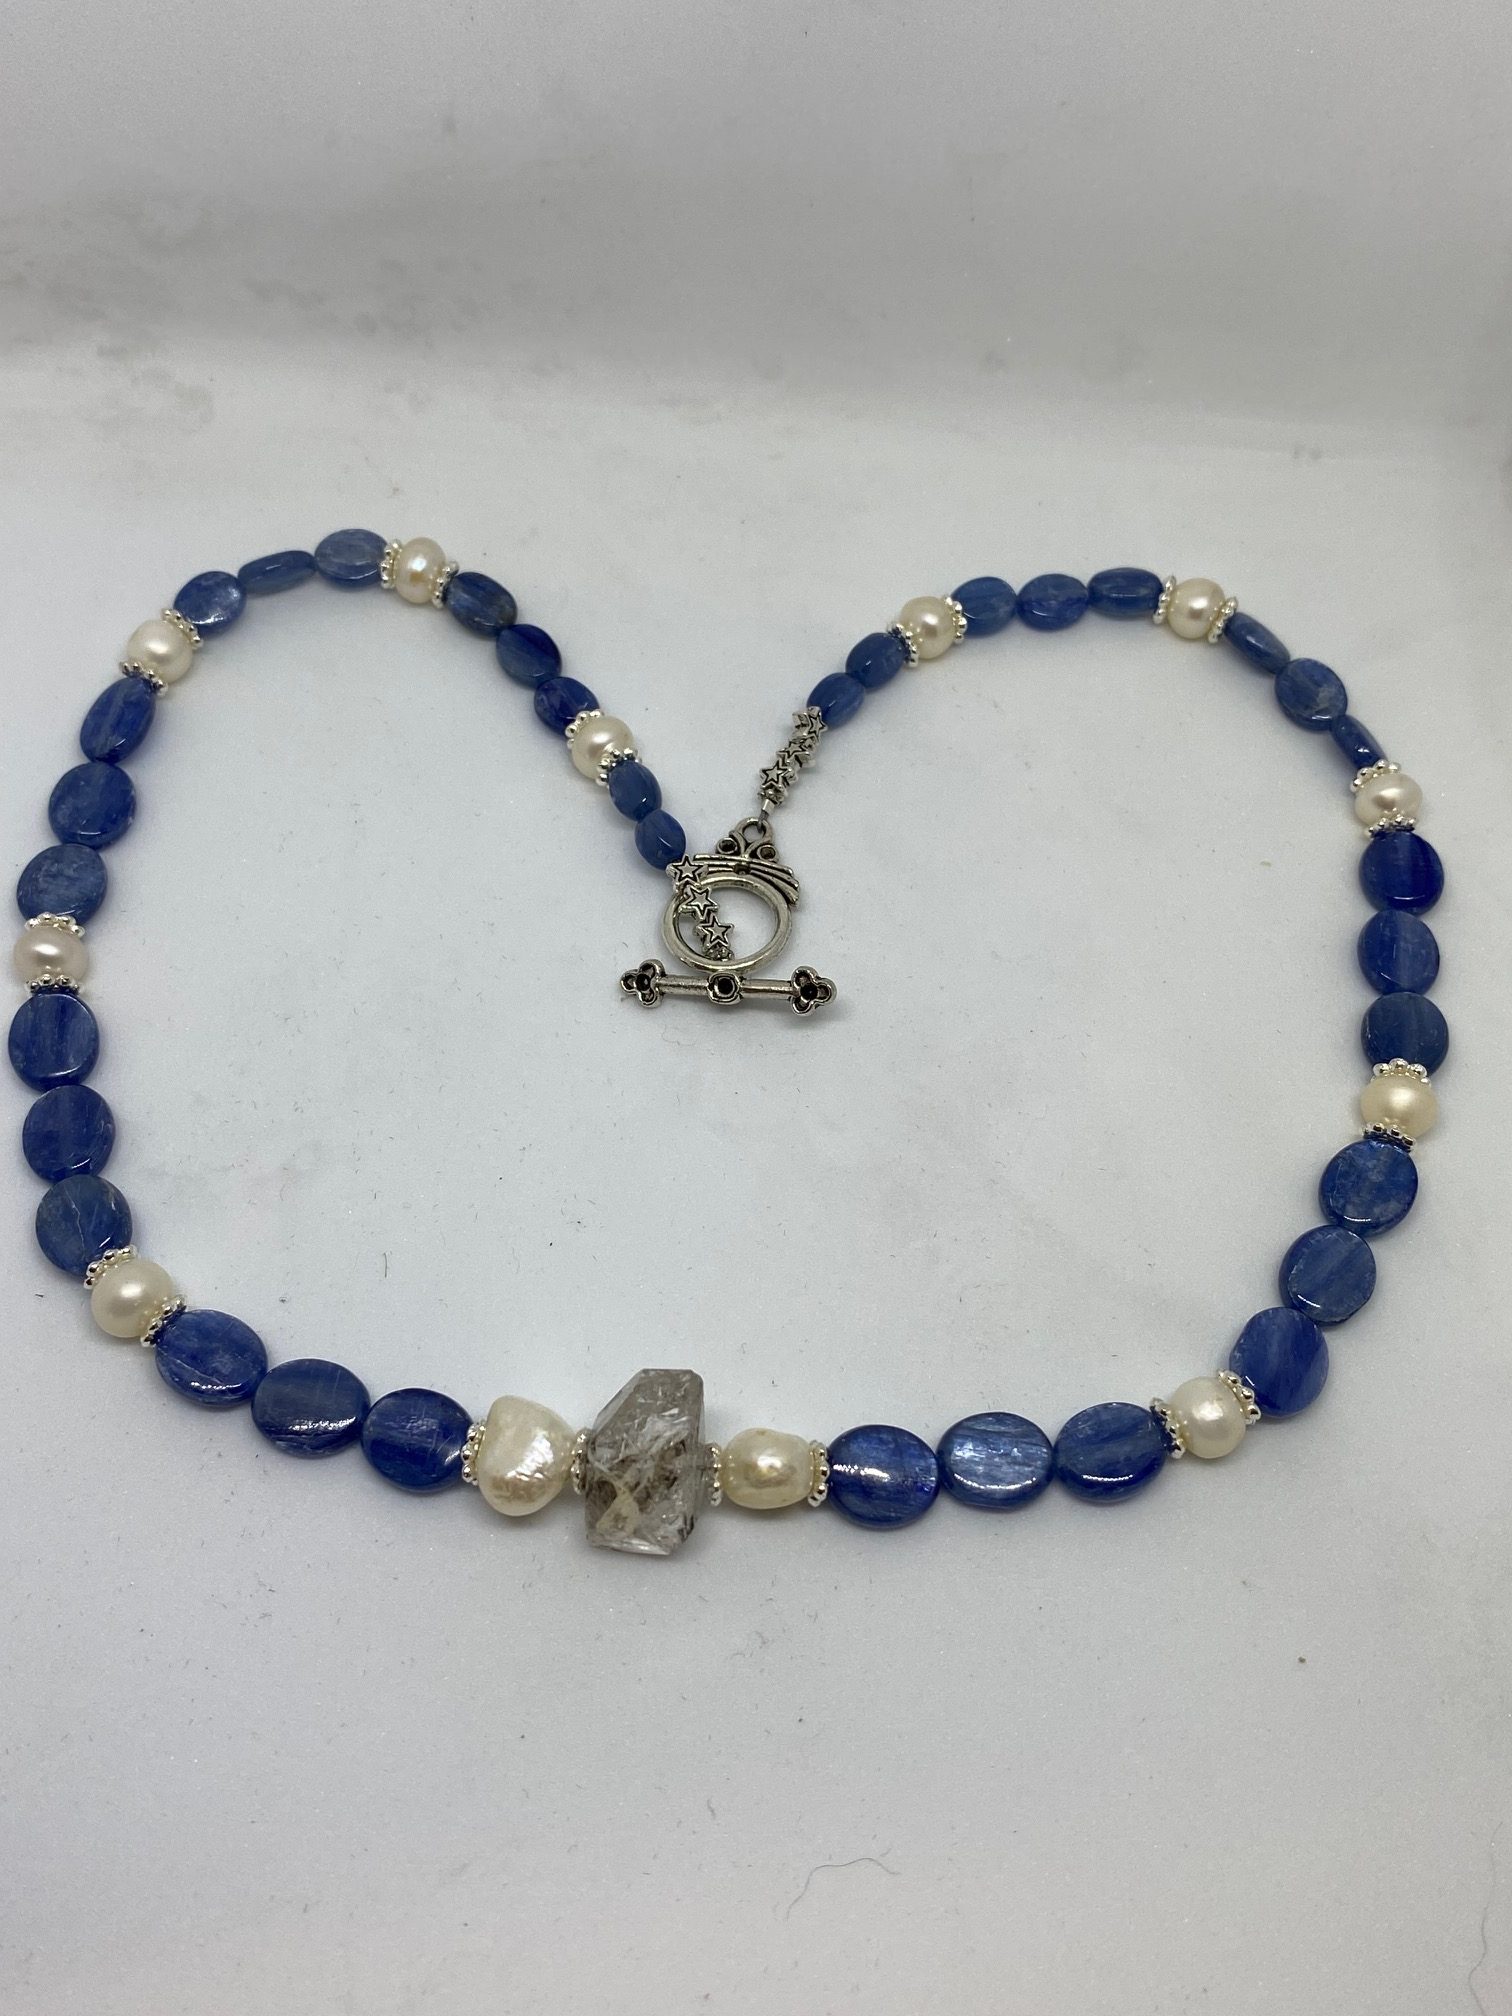 Blue Kyanite, Herkimer Diamond, and Pearl Necklace This necklace promotes Empowerment on all levels, Bliss, and Tranquility.